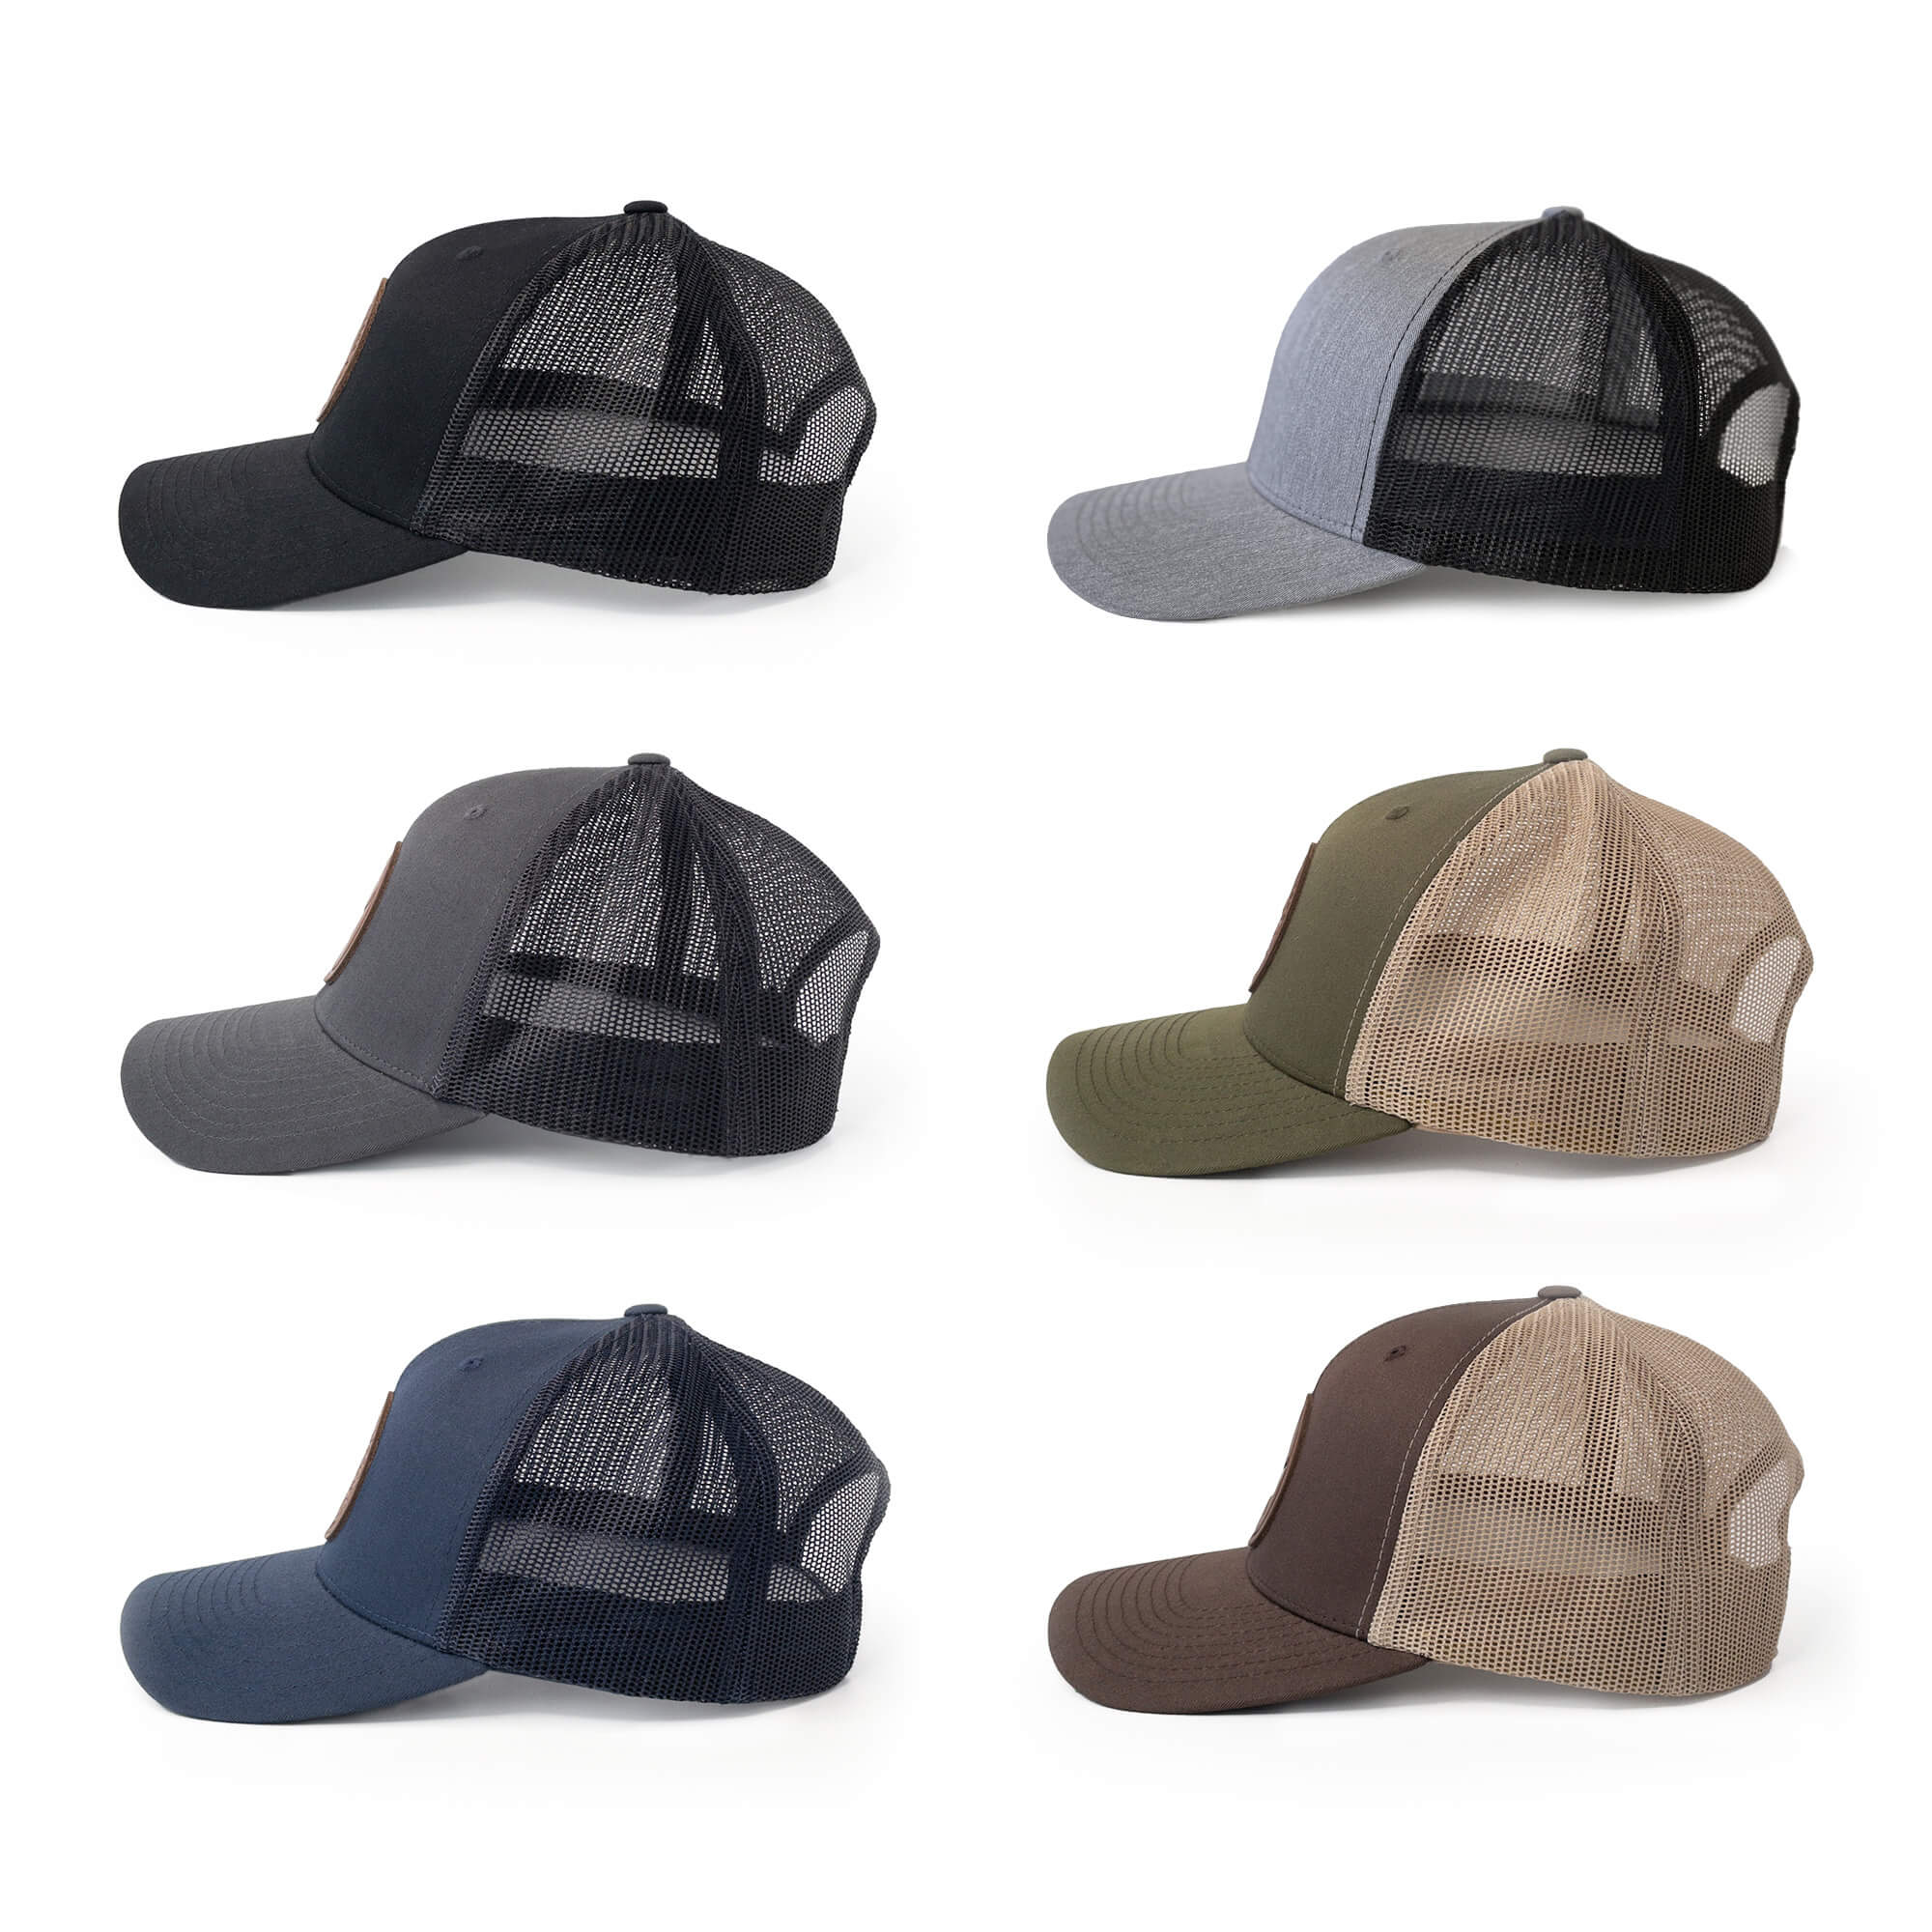 Leather patch trucker hats available in 6 colors | BLACK-005-004, CHARC-005-004, NAVY-005-004, HGREY-005-004, MOSS-005-004, BROWN-005-004